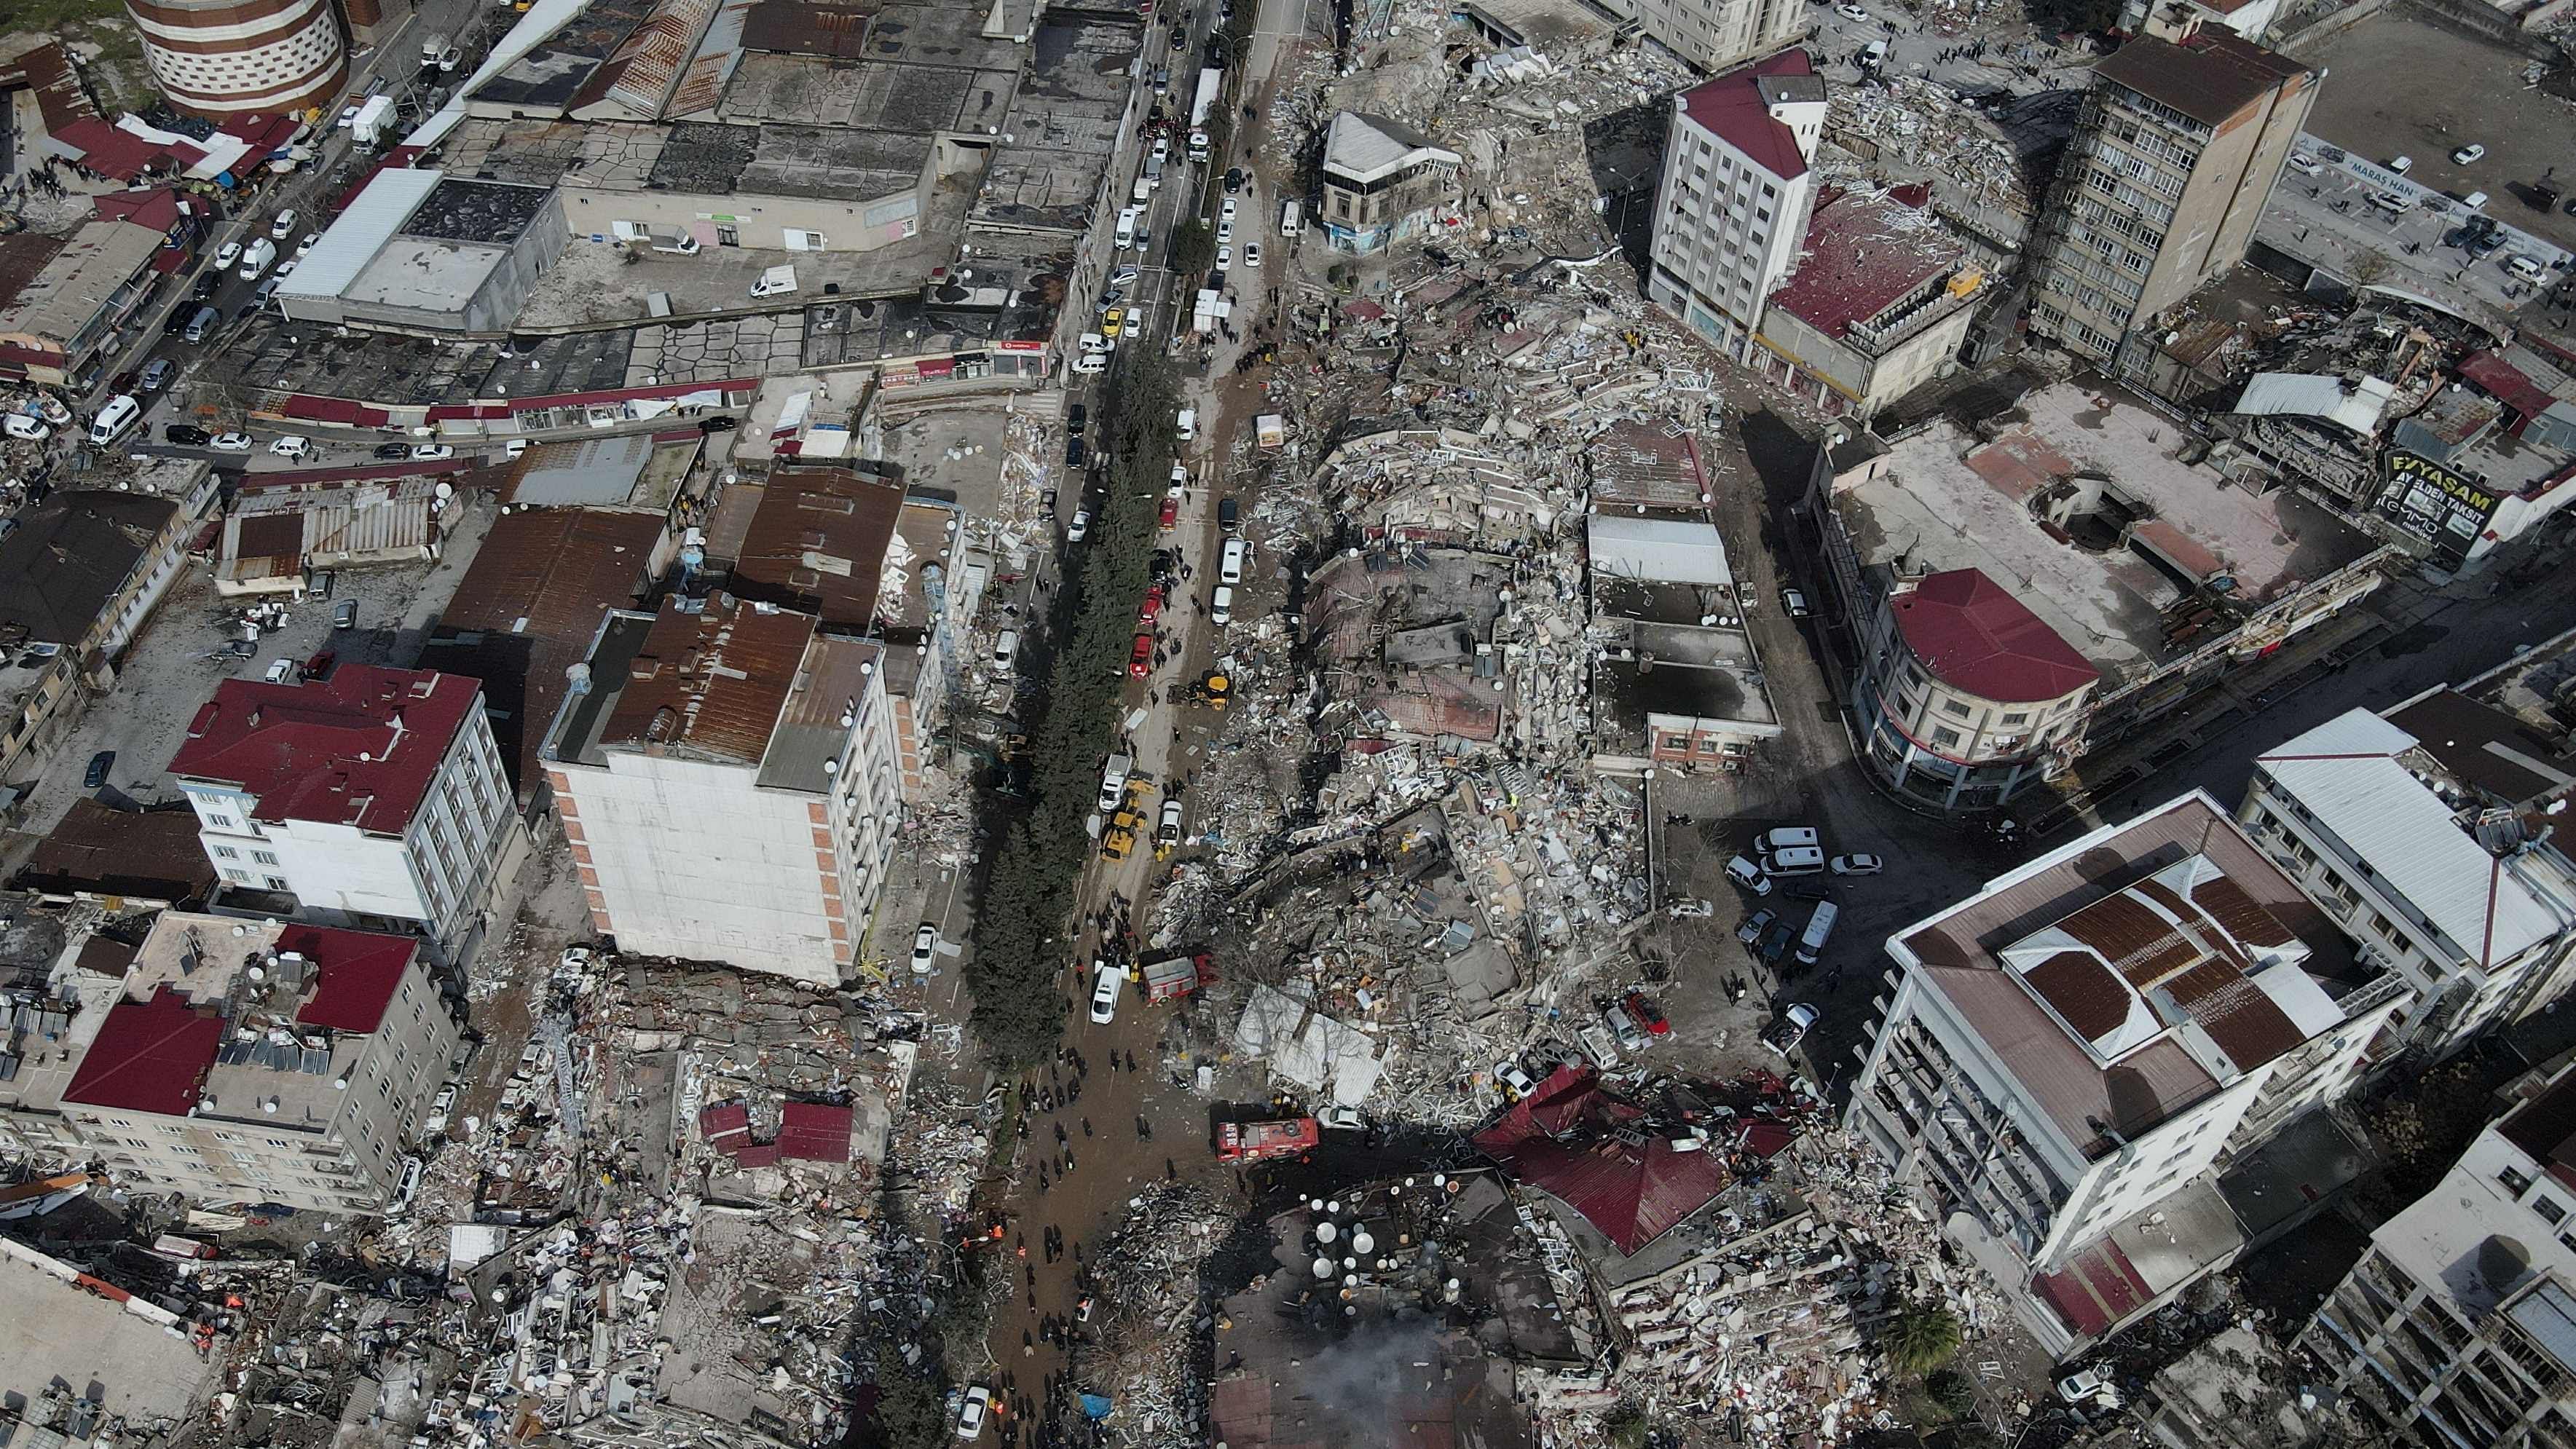 An aerial view shows damaged and collapsed buildings following an earthquake, in Kahramanmaras, Turkey. Credit: Reuters Photo